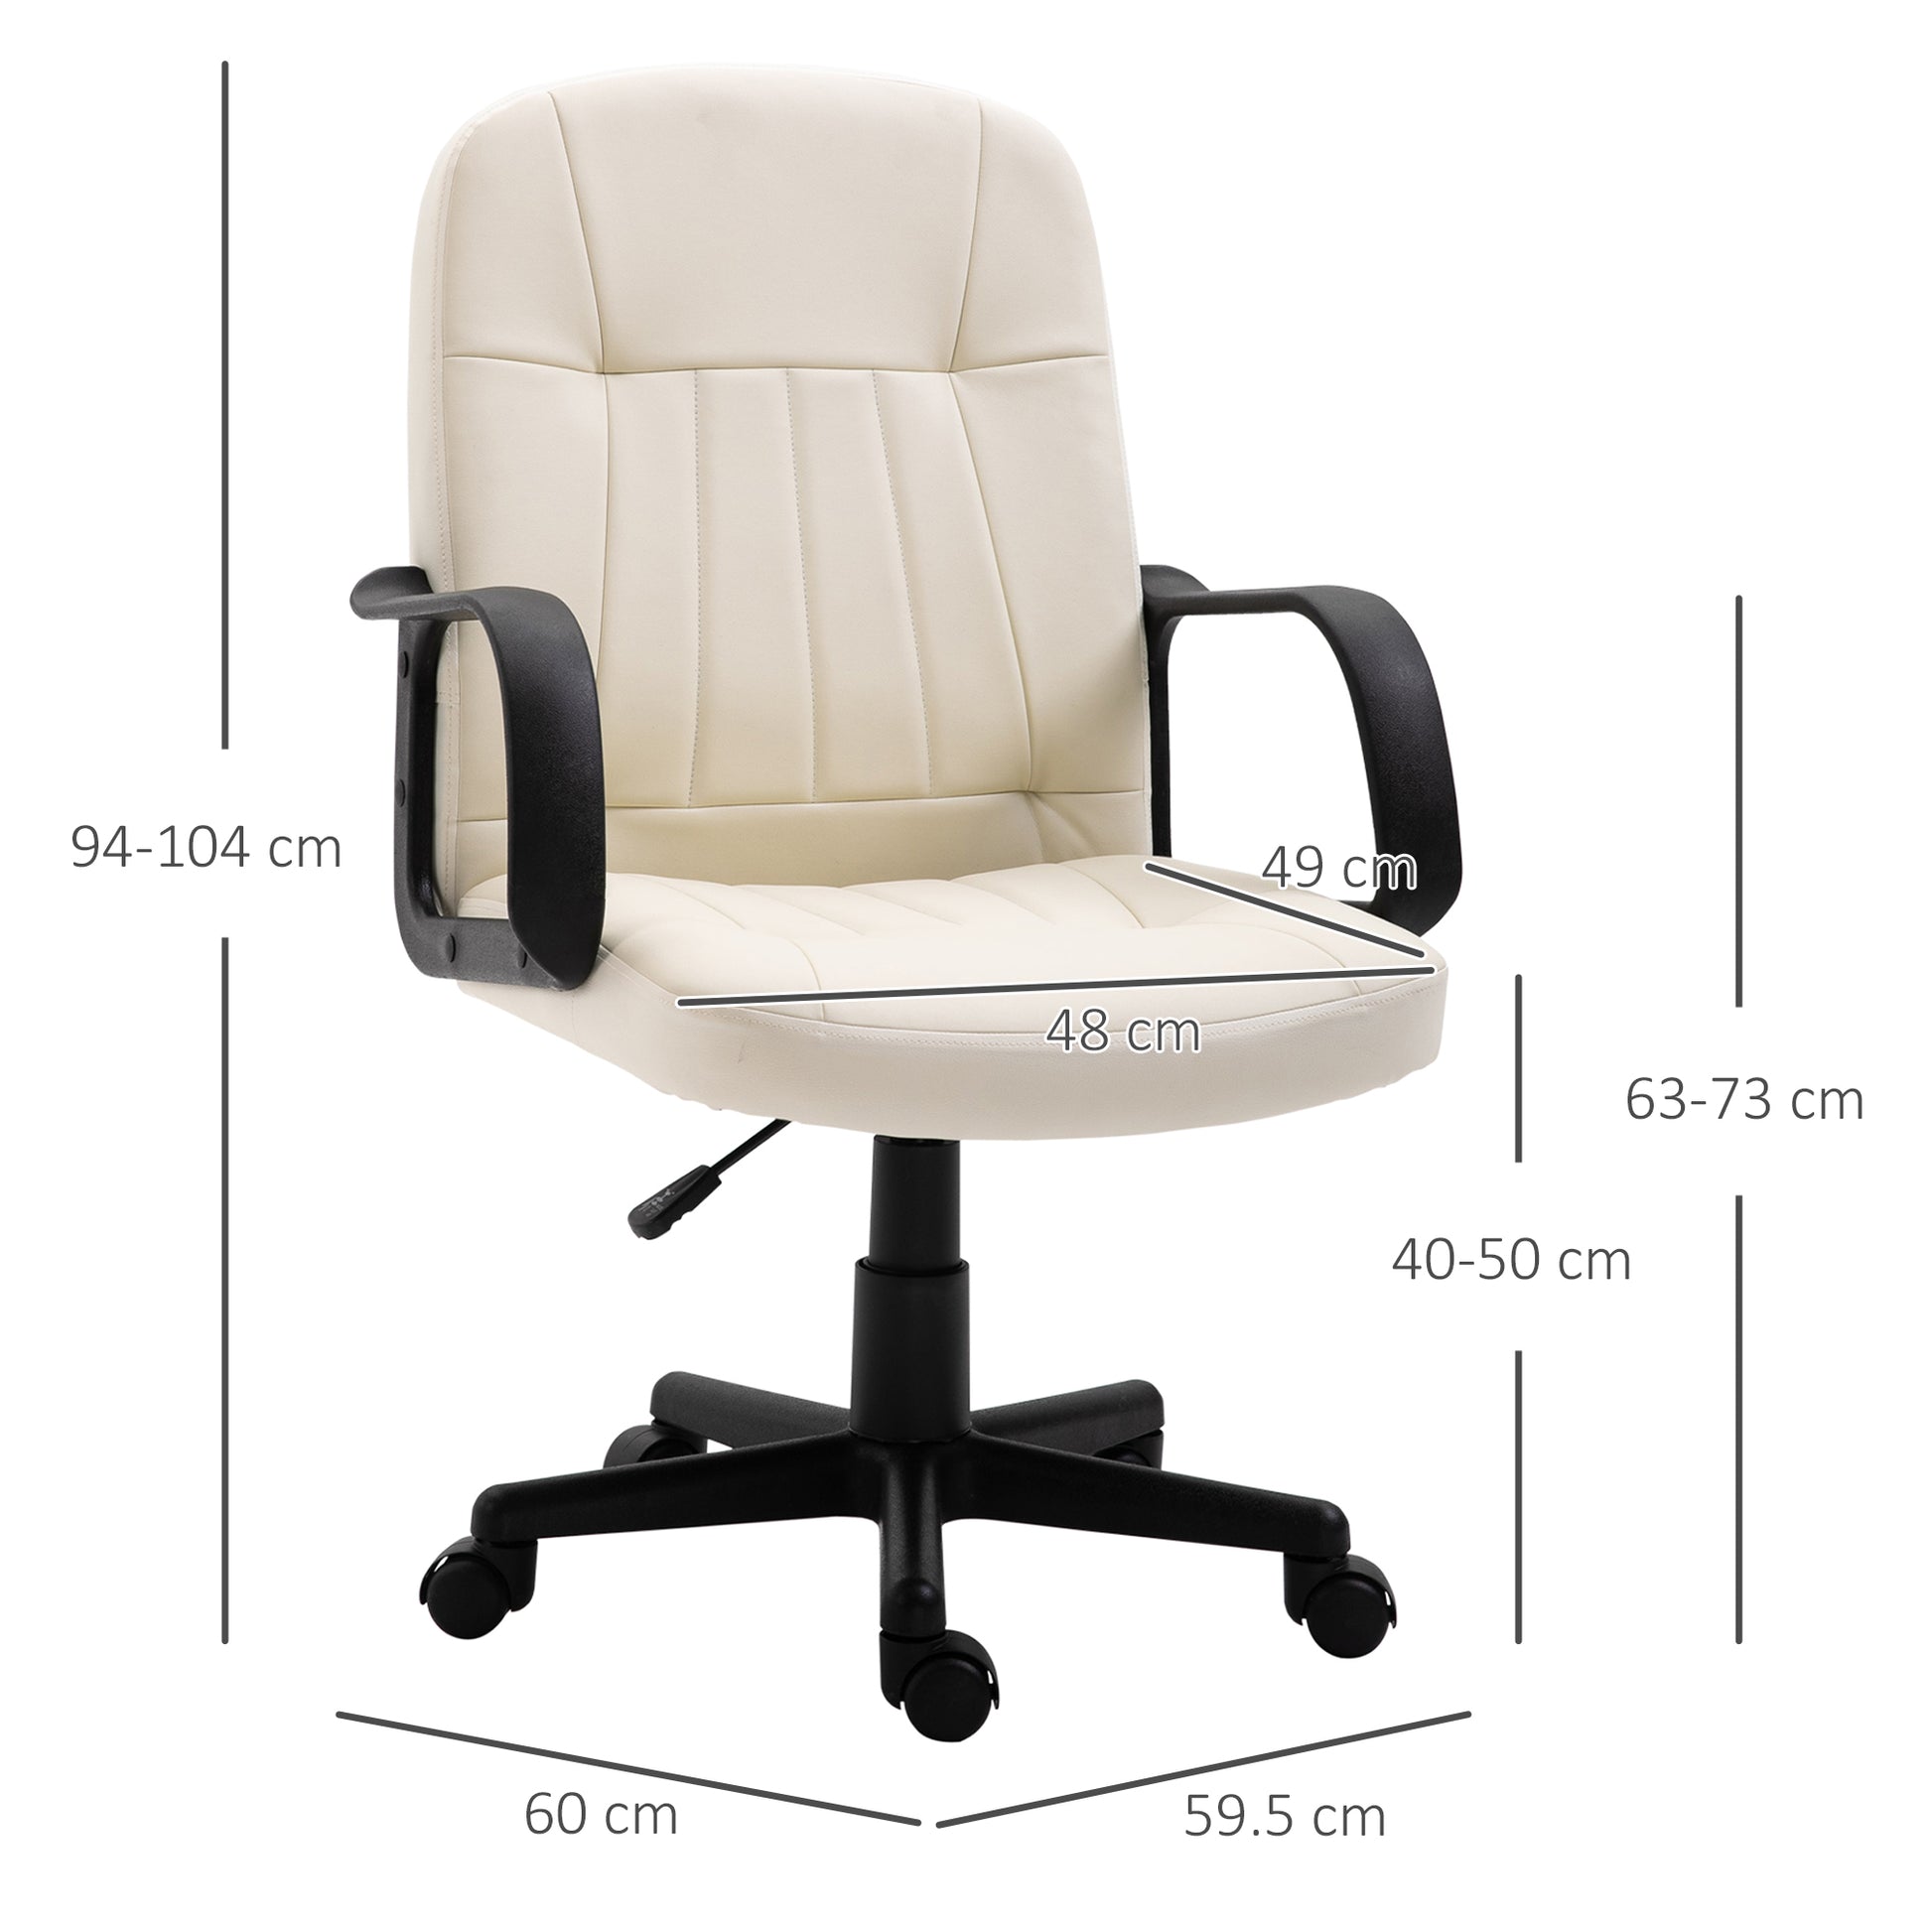 Swivel Executive Office Chair Home, Office Mid Back PU Leather Computer Desk Chair for Adults, Wheels, Cream, HOMCOM, 3